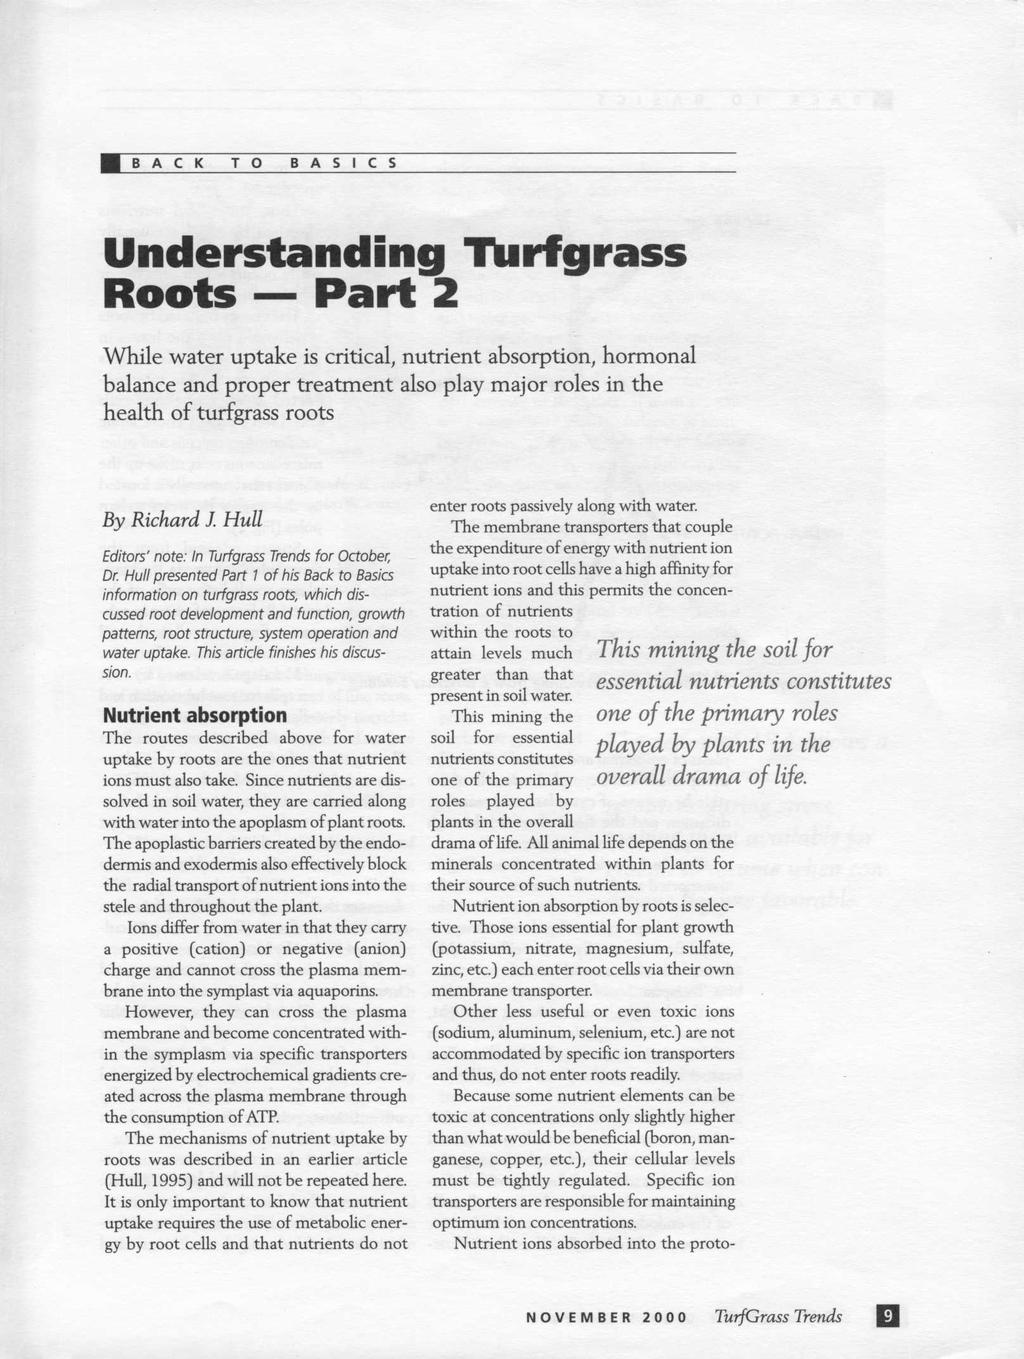 Understanding Tlirfgrass Roots Part 2 While water uptake is critical, nutrient absorption, hormonal balance and proper treatment also play major roles in the health of turfgrass roots By Richard J.